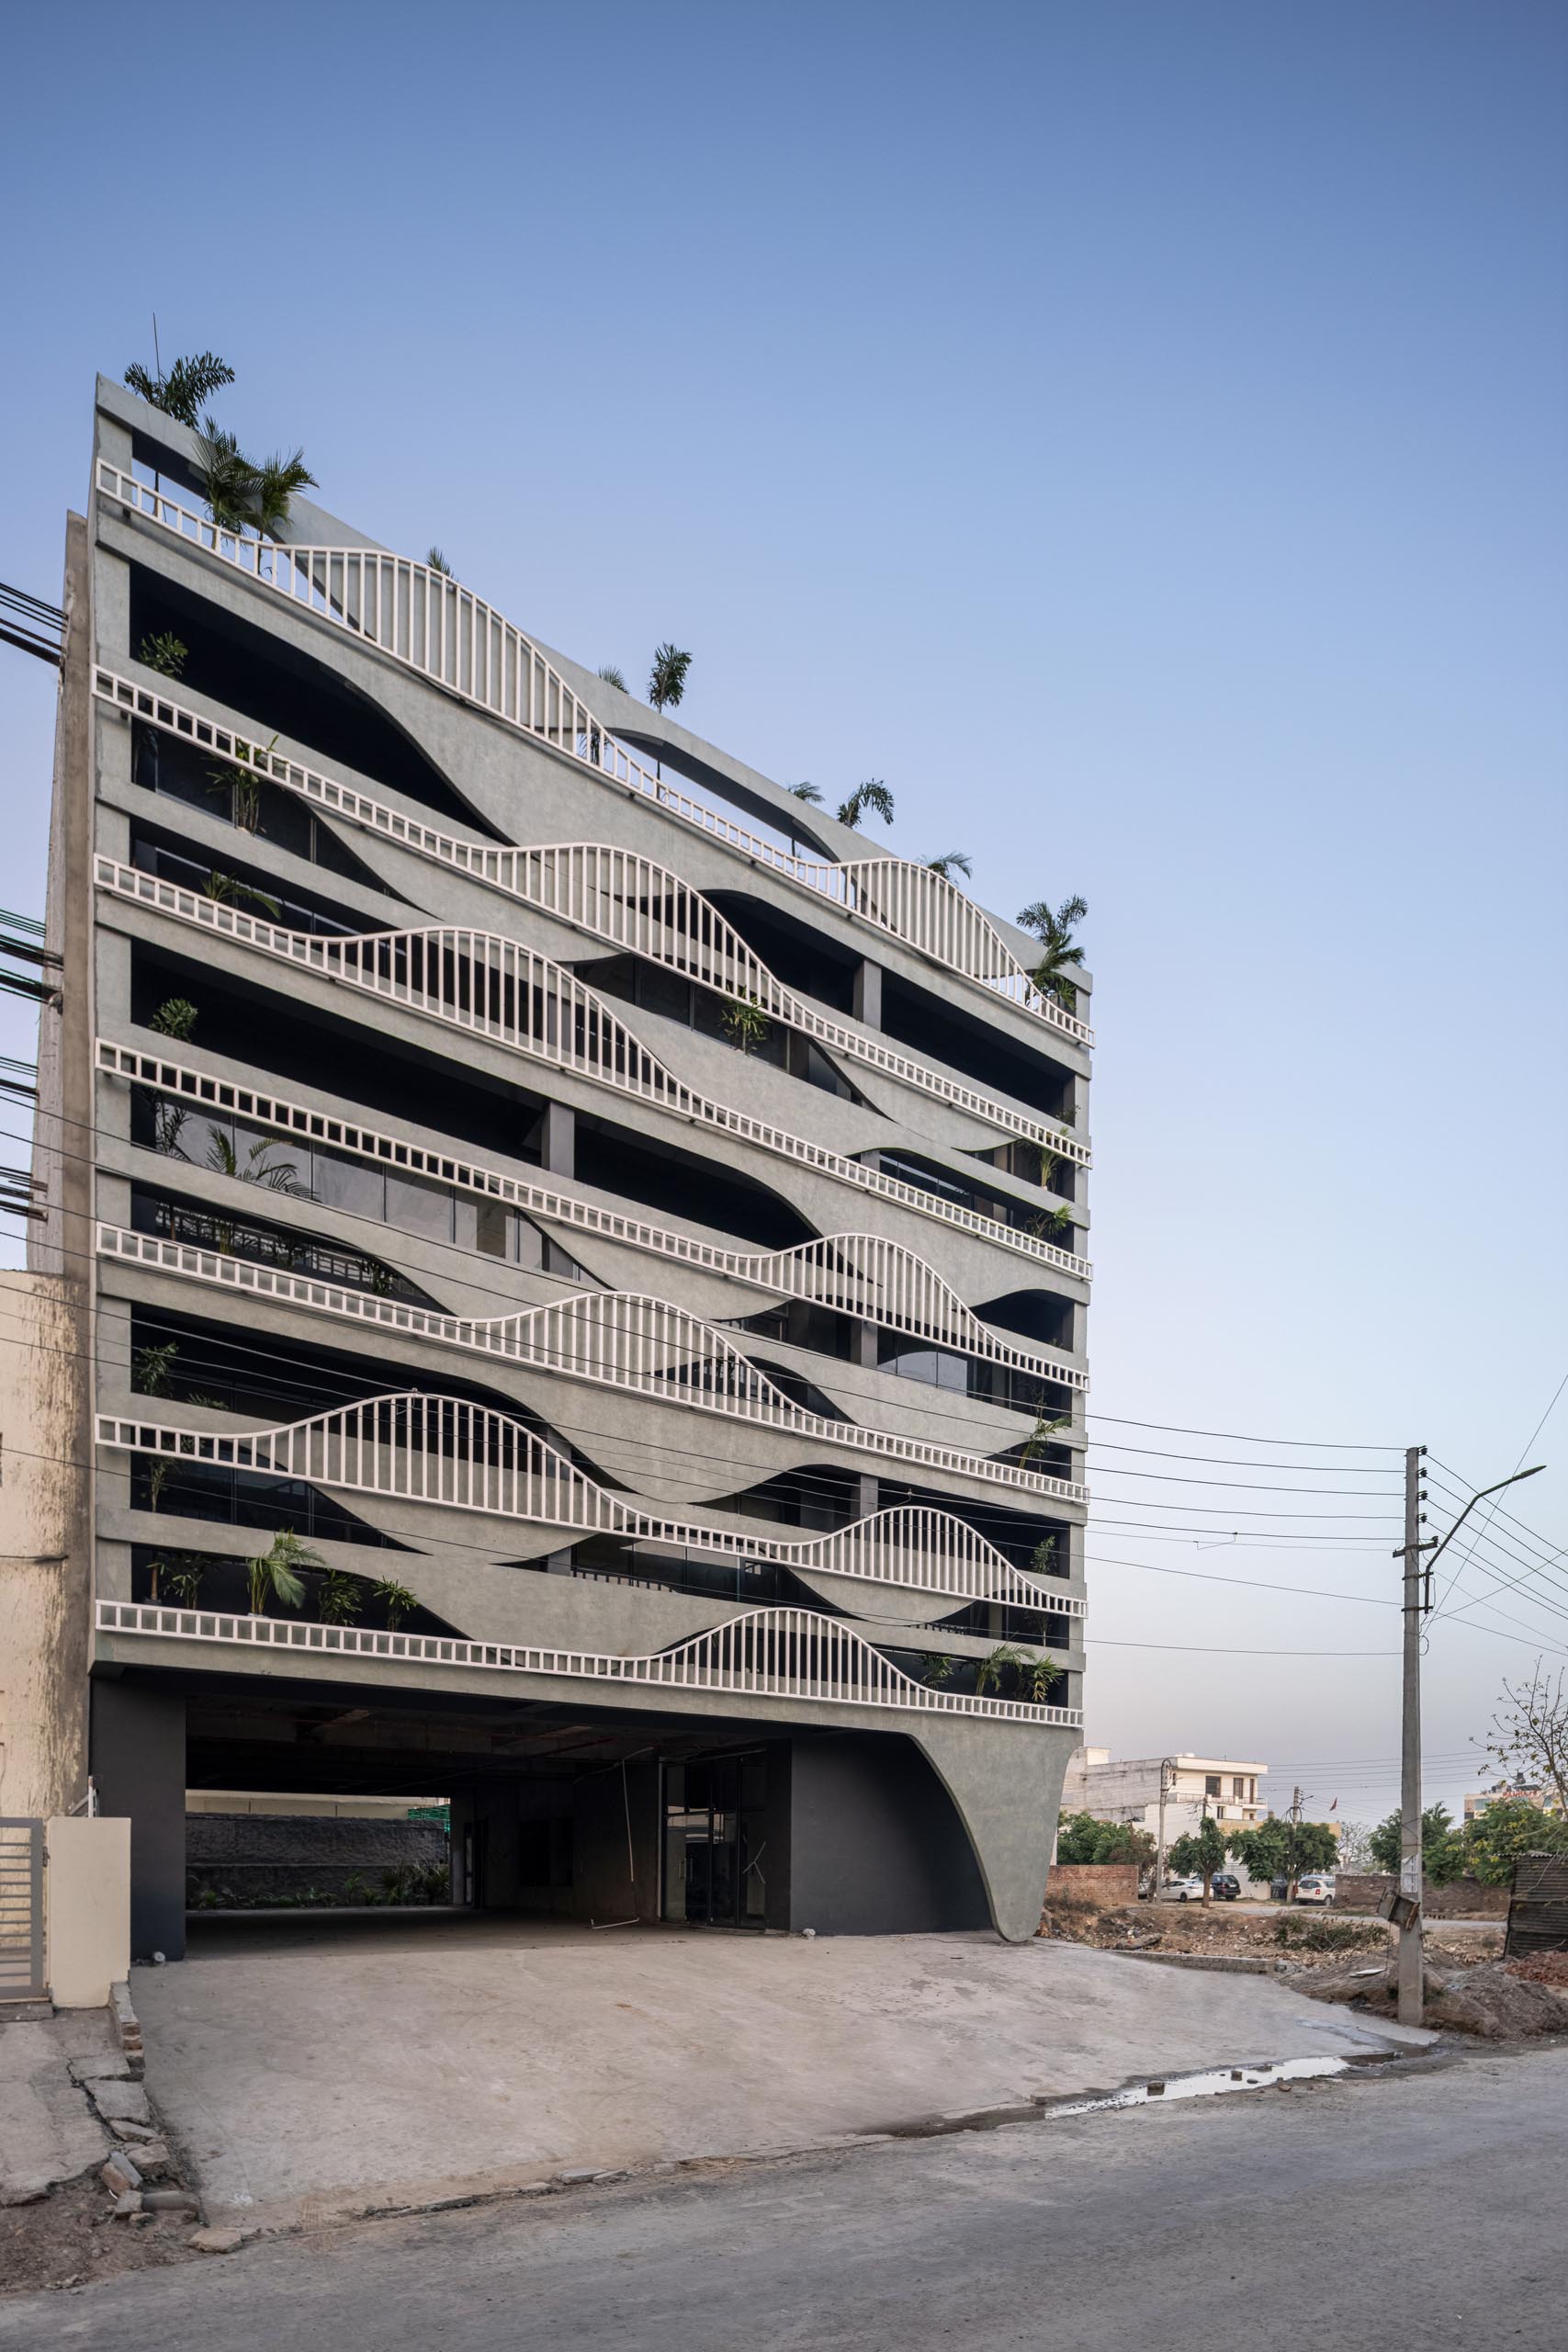 A unique building facade that's designed to look like melting concrete, with complimentary balcony railings.